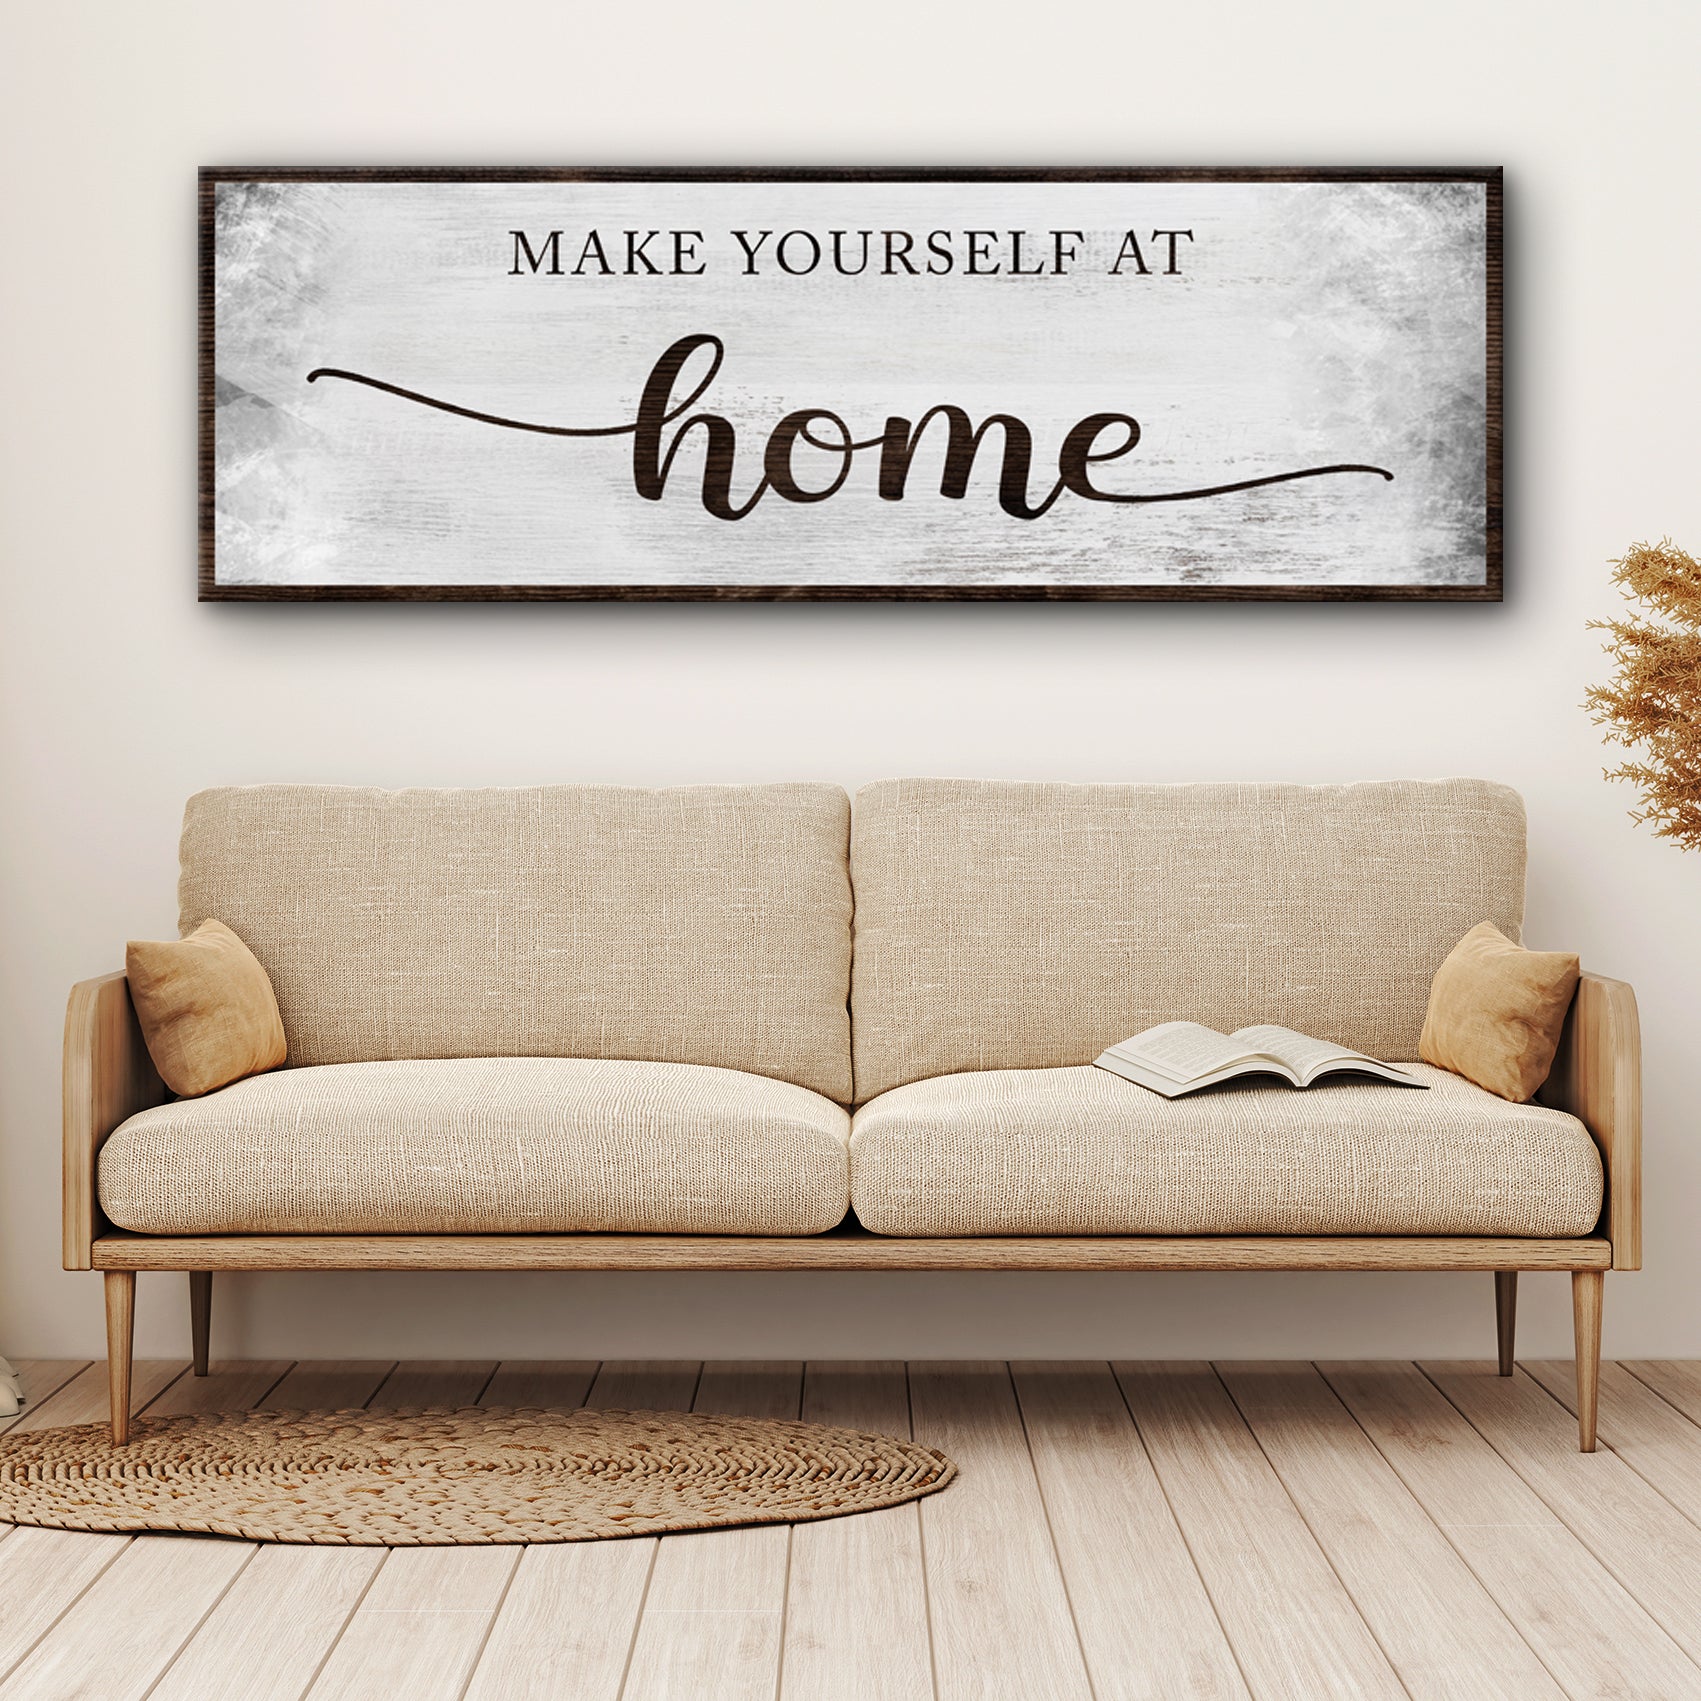 Make yourself at home Grunge Sign - Image by Tailored Canvases